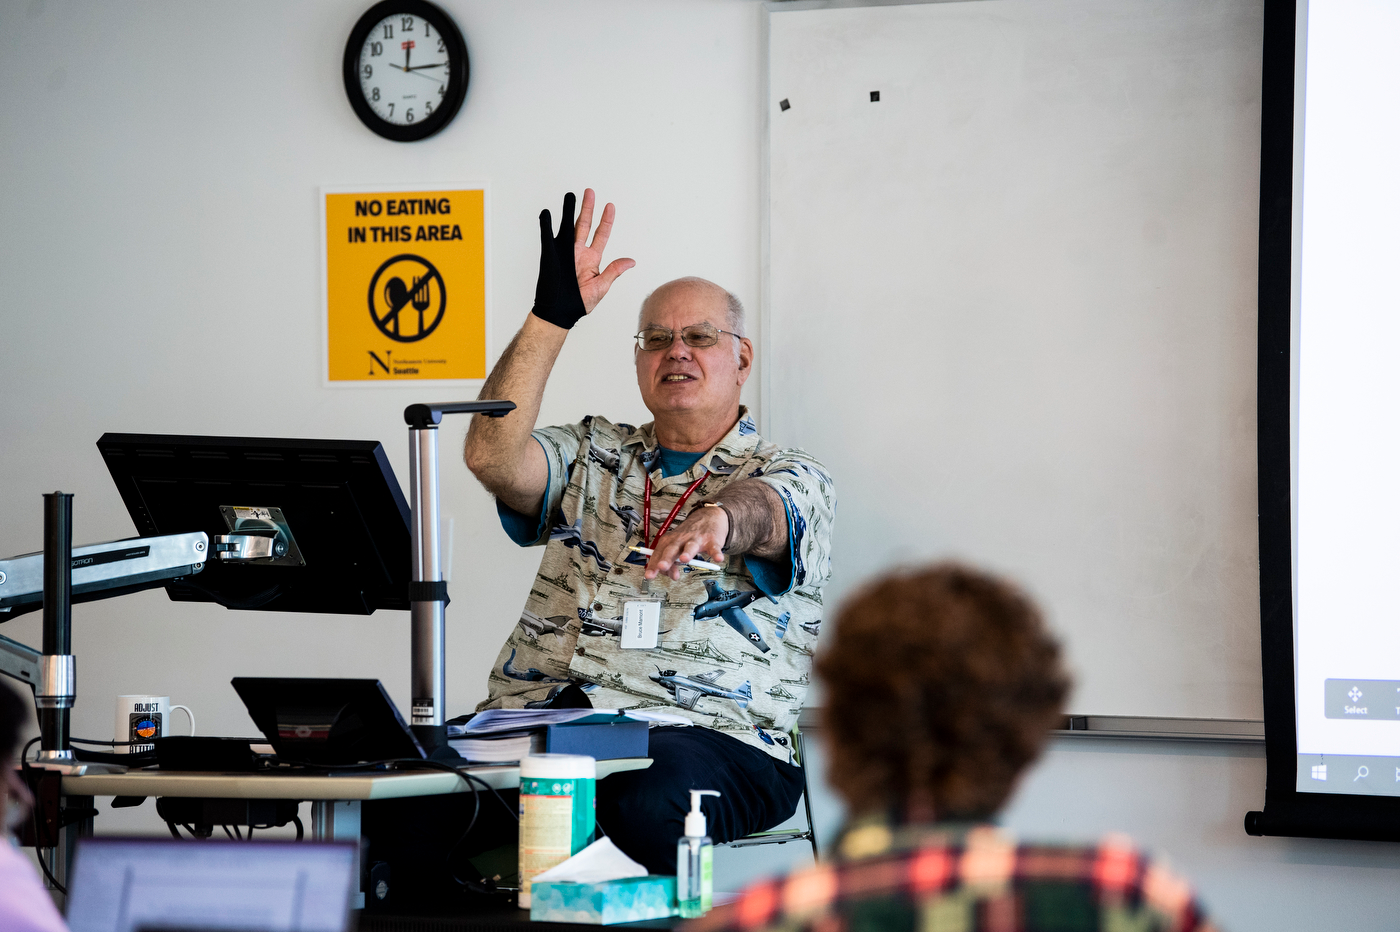 A white male faculty member raises his hand at the front of the class while holding a stylus pen forward in the other hand.